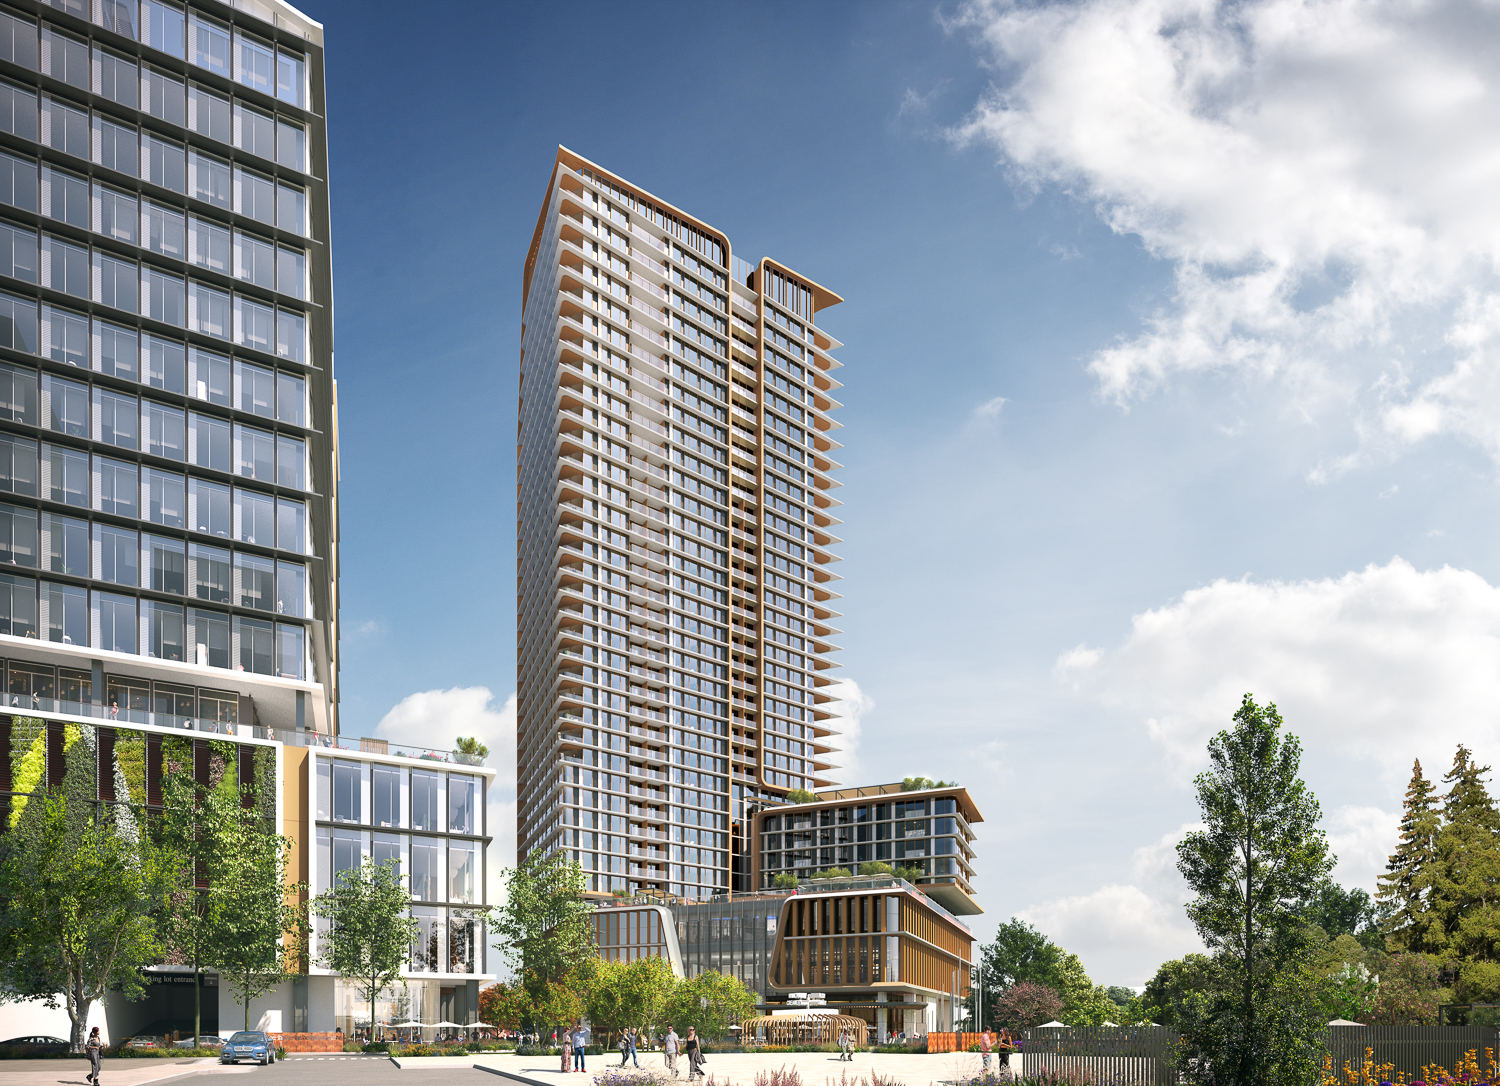 Willow Park apartment tower, rendering by Solomon Cordwell Buenz